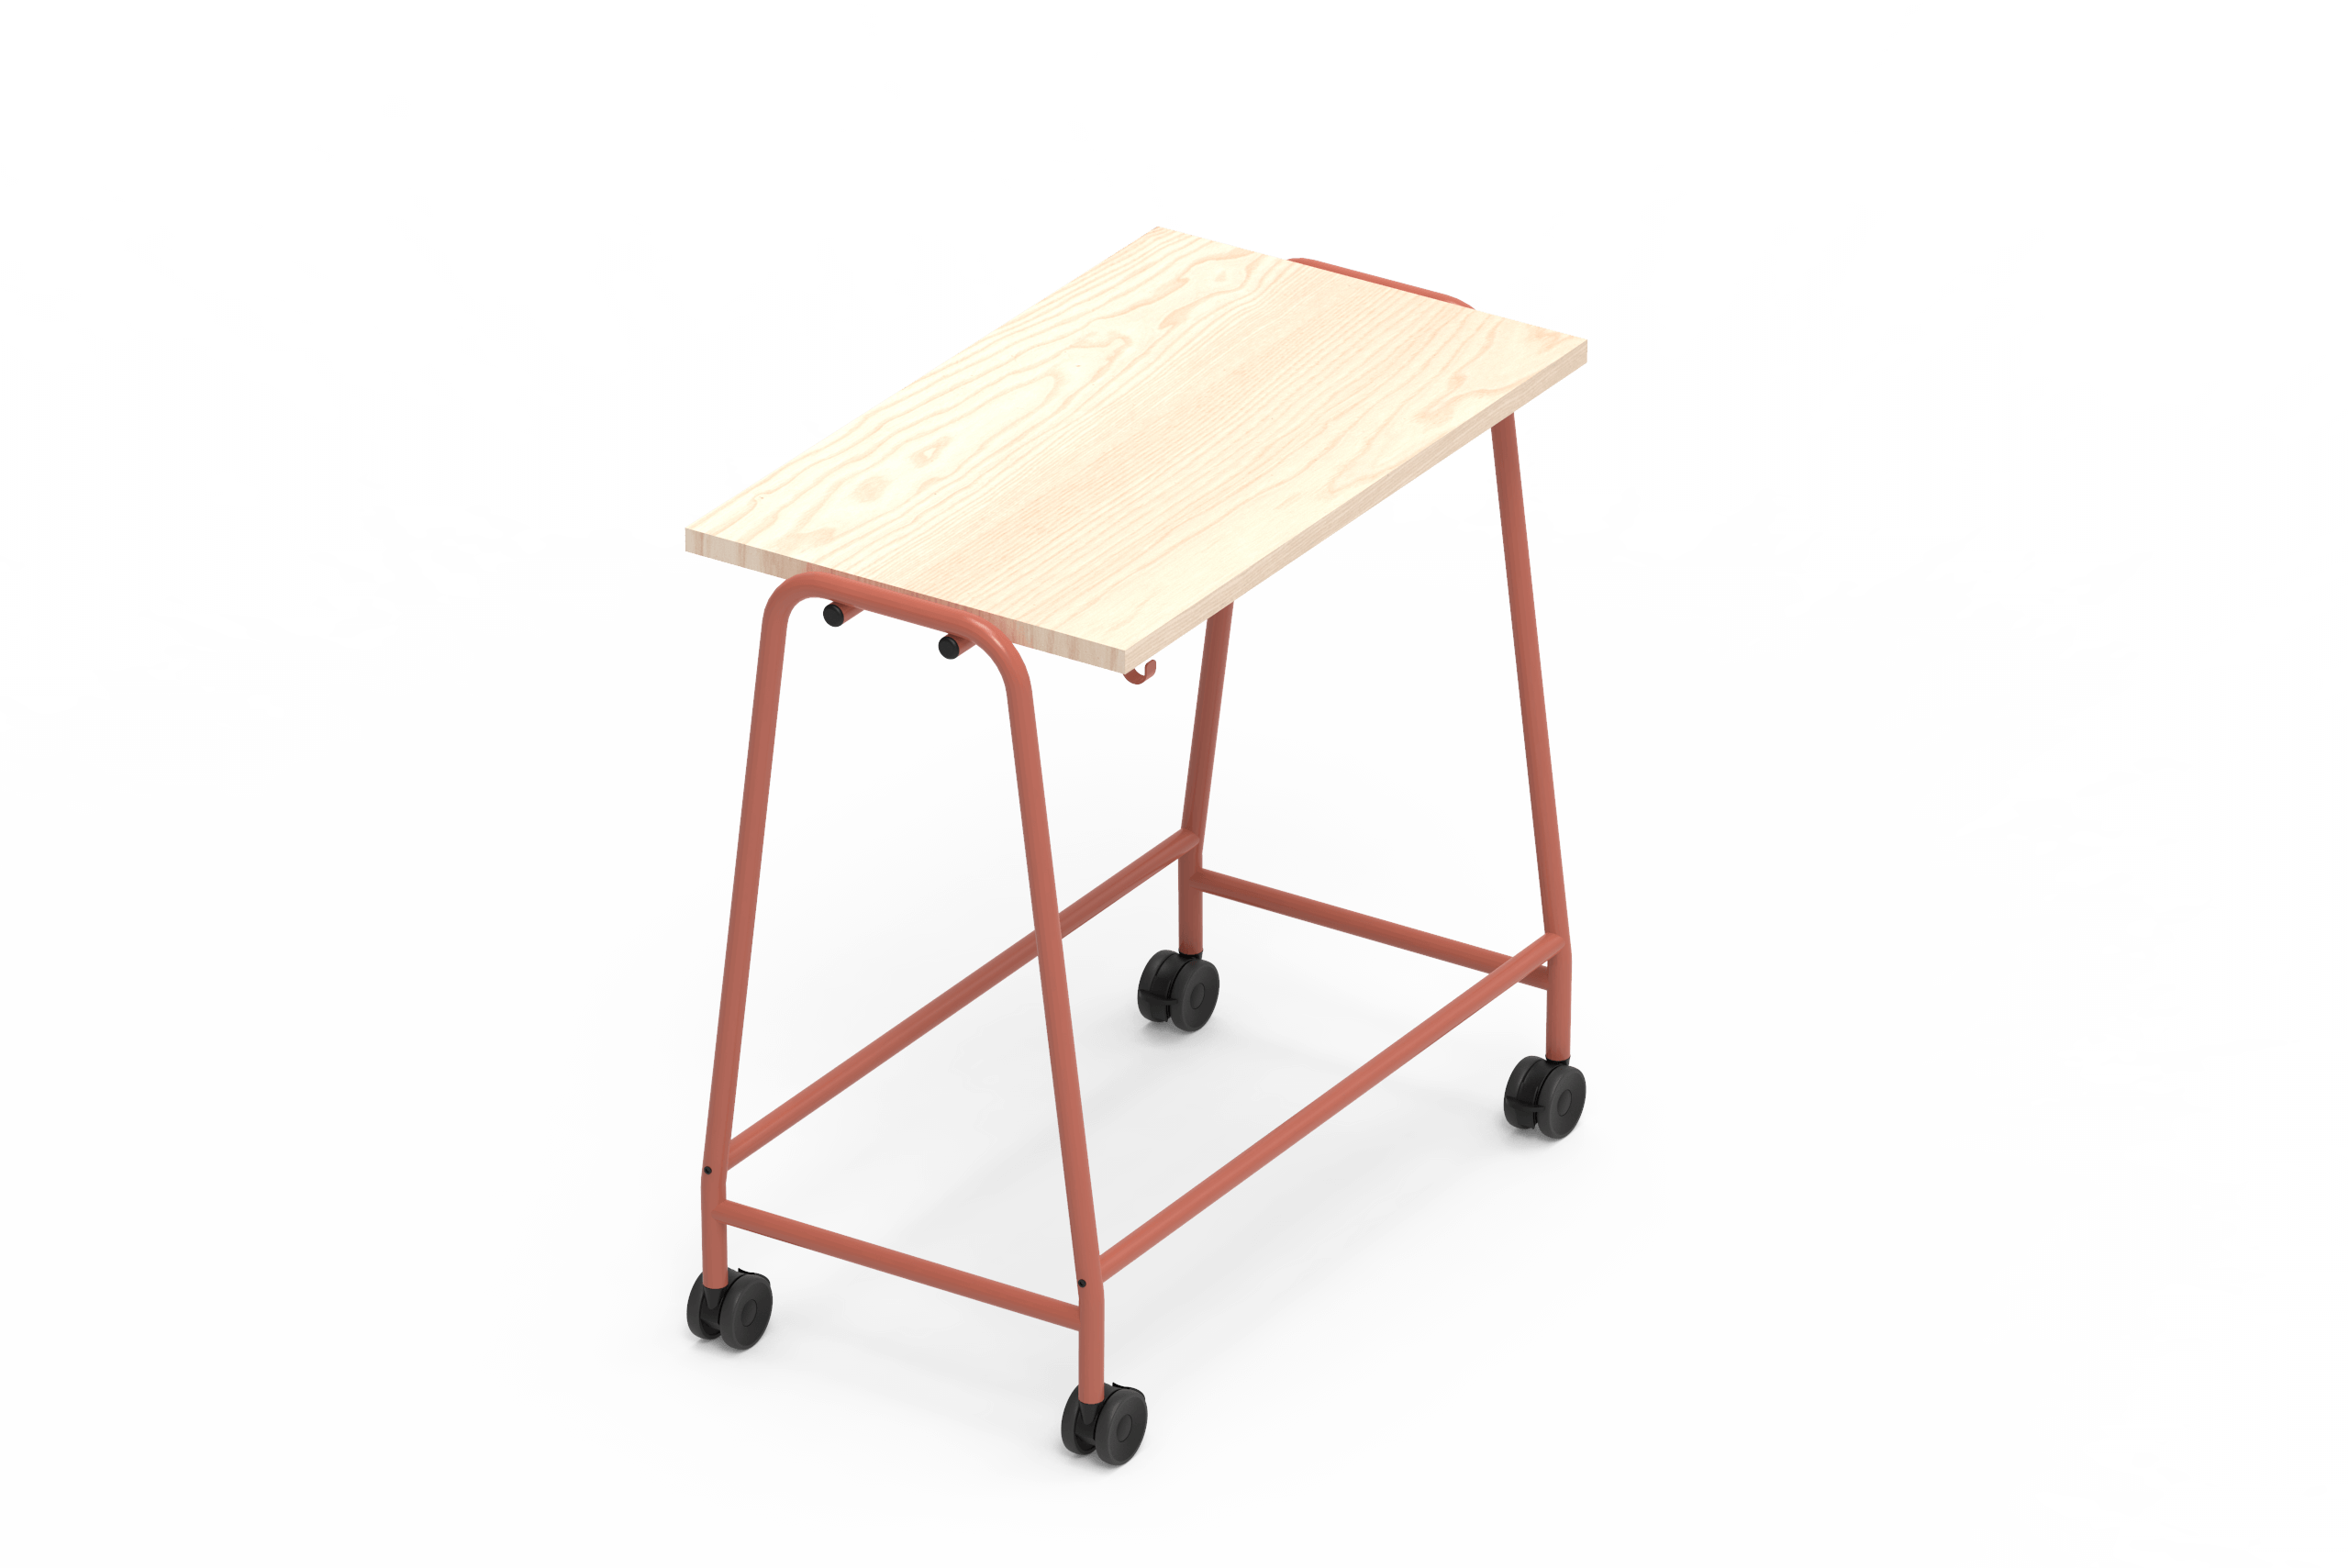 Chit chat table on wheels. Image shows red frame with plywood top